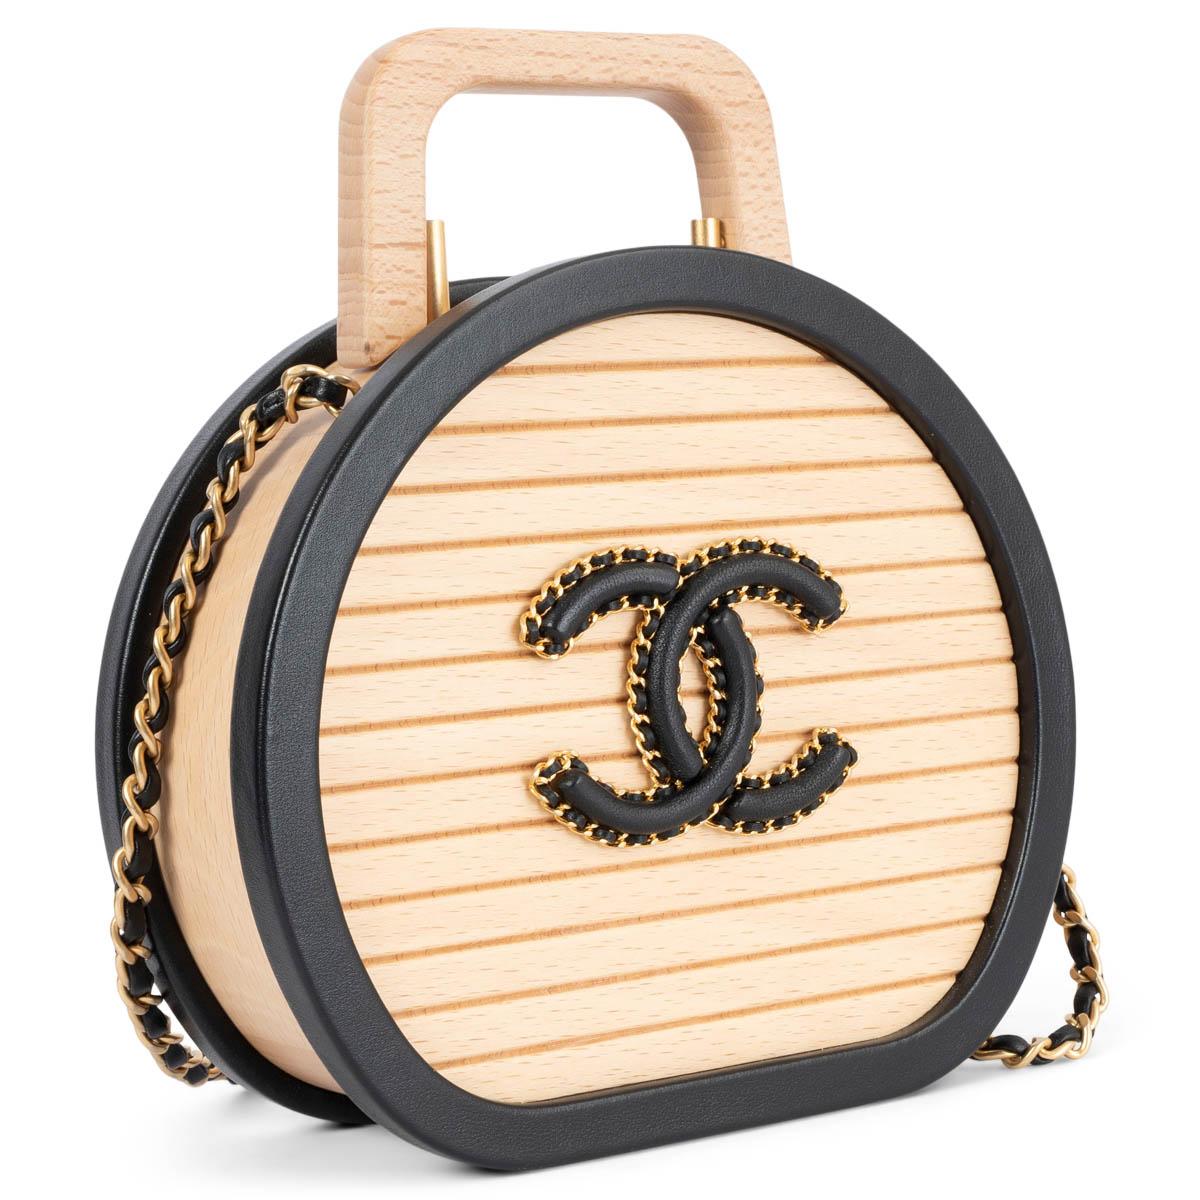 100% authentic Chanel Small Vanity bag in beige beechwood with black leather trims and antique gold-tone hardware. Rare limited edition. Opens with a logo clasp closure and is lined in black quilted calfskin and wood with one quilted classic flap